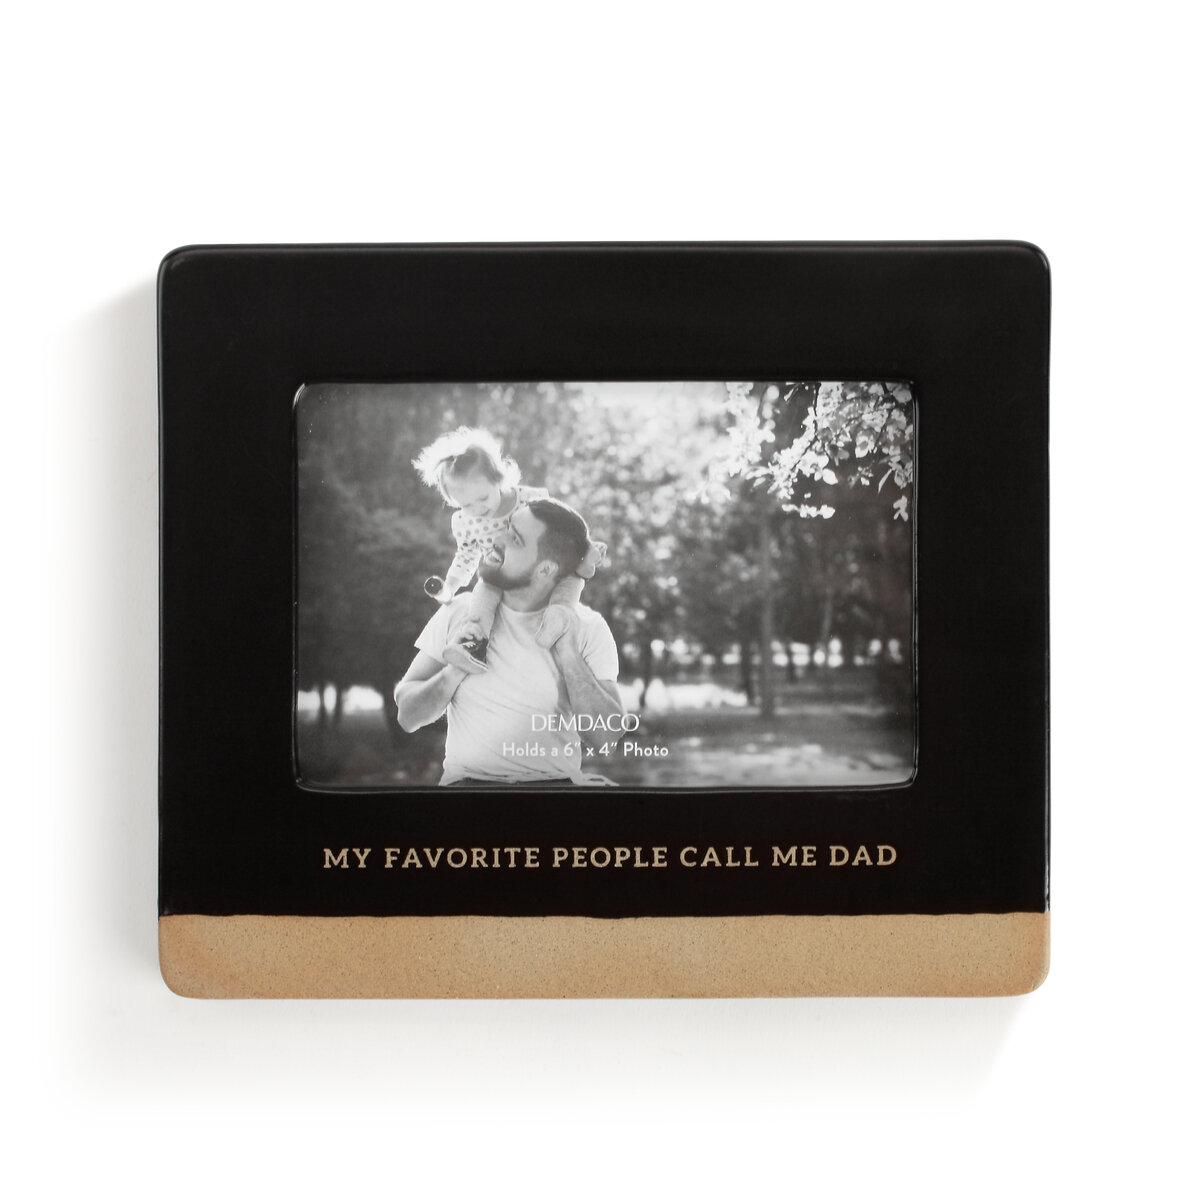 Demdaco Greatest of all Time Sleek Black 8 x 6.5 Stoneware Tabletop Picture Frame